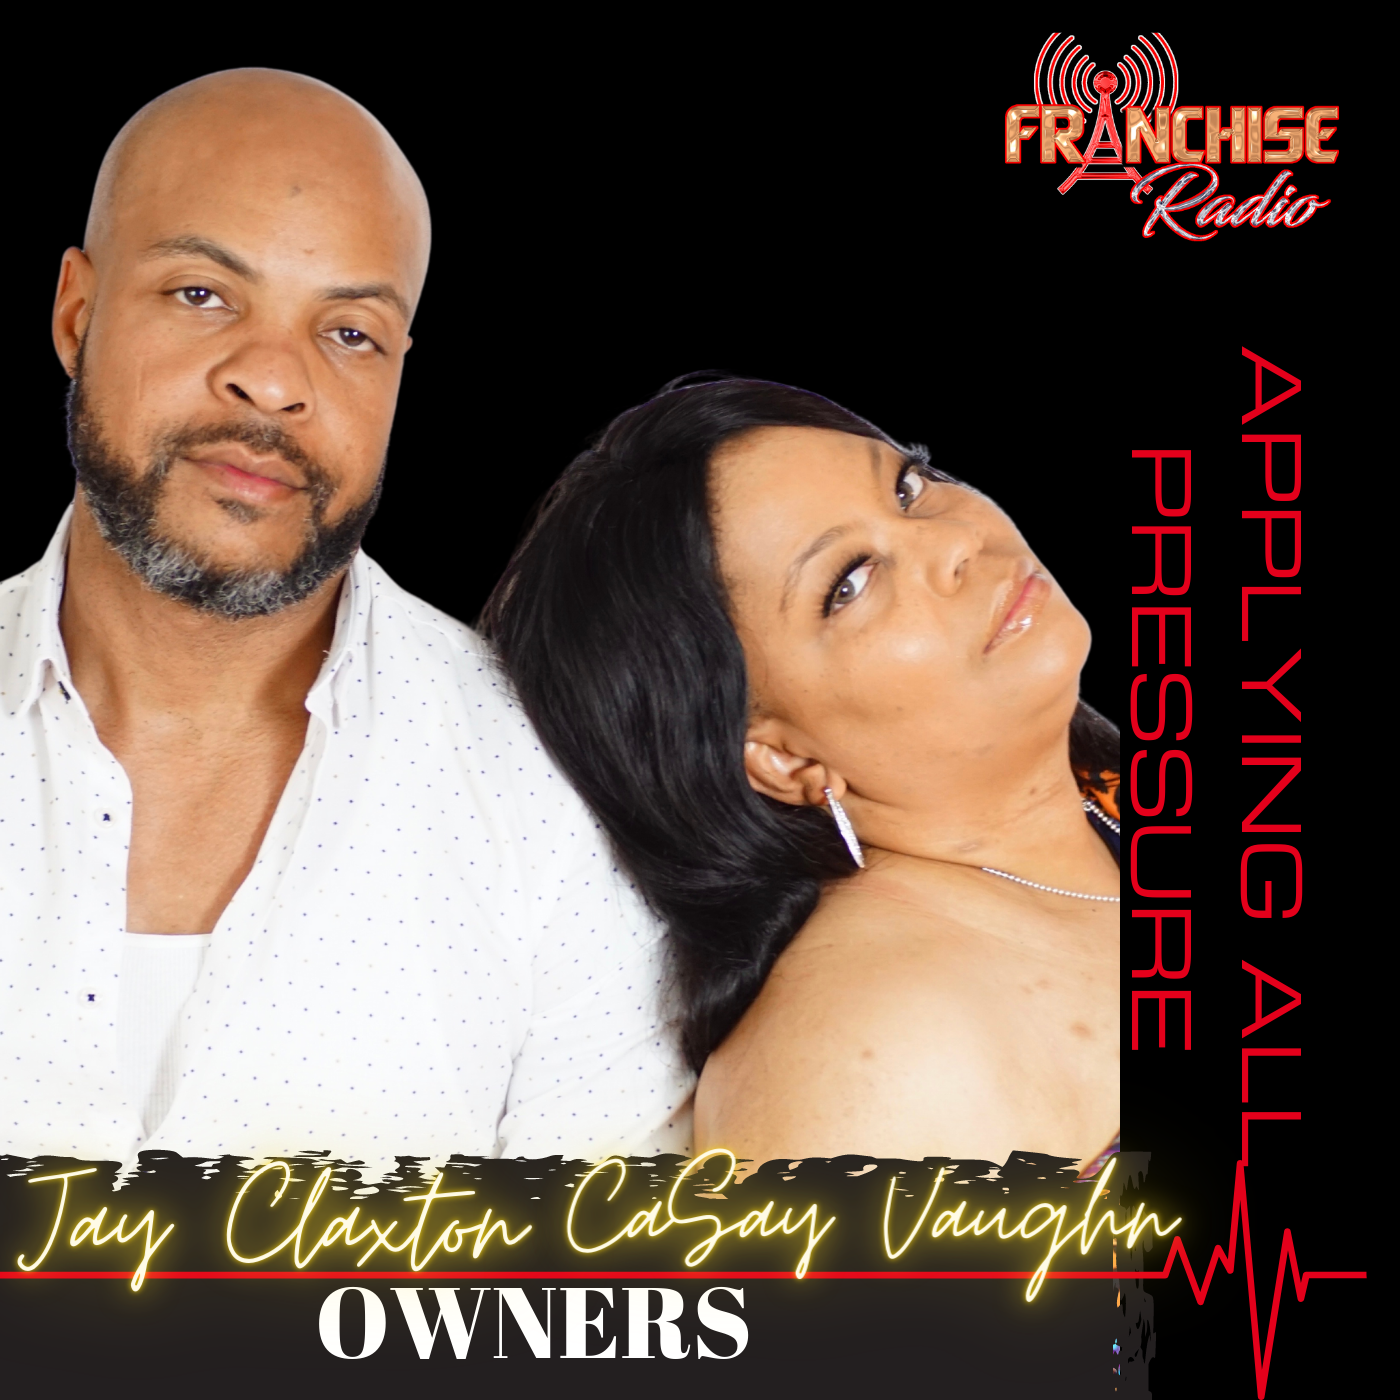 Power Couple Jay and CaSay co-owners of Franchise Radio